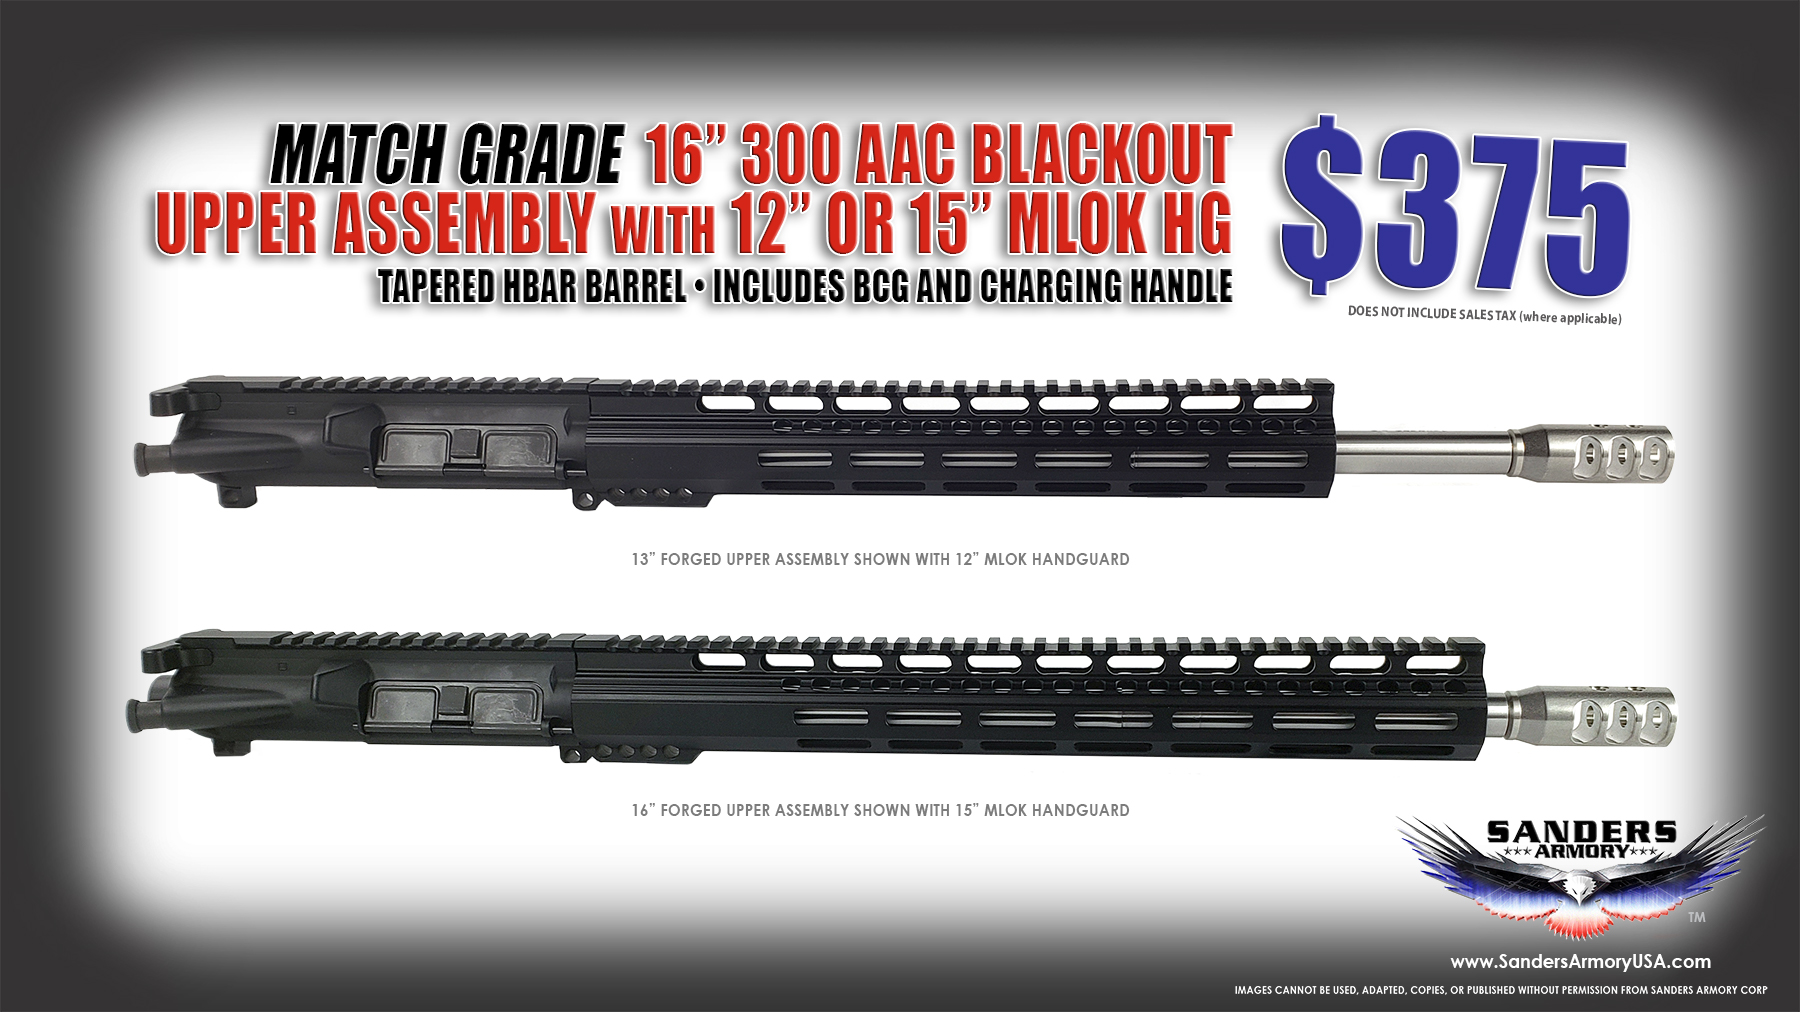 Sanders Armory Match Grade 16" 300 AAC Blackout Stainless Steel Forged Upper Assembly 5R